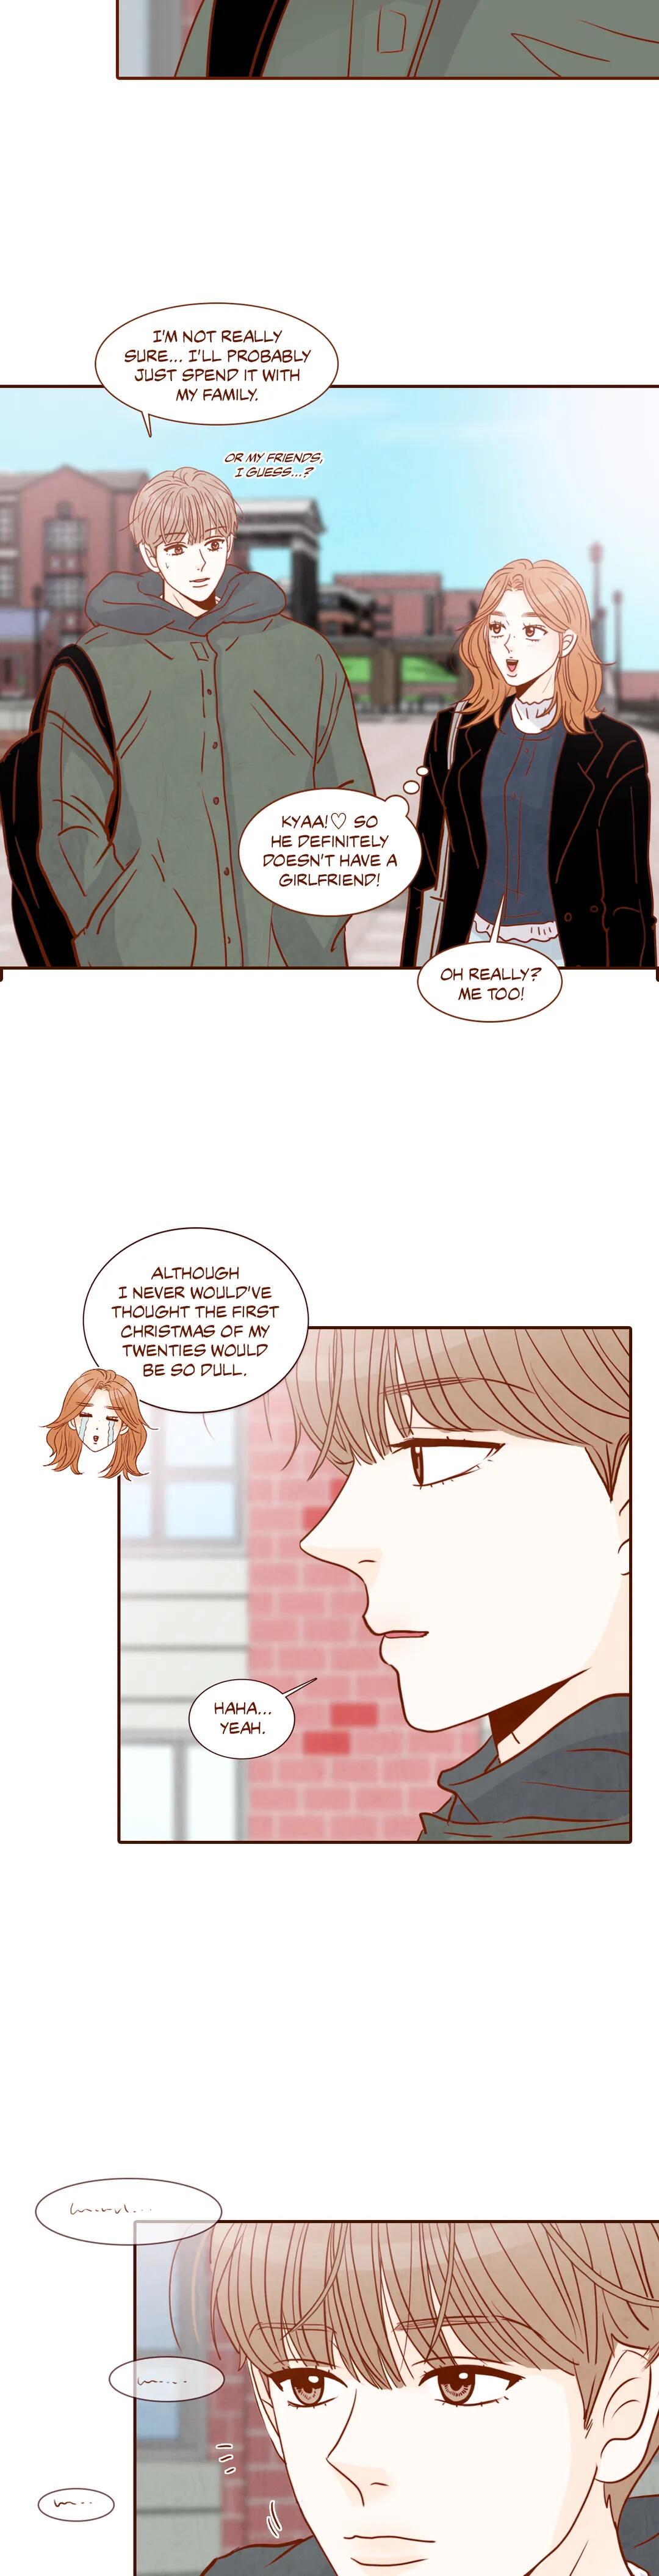 Secret Crush Chapter 112 - Side Story: Who Is That? - Picture 3